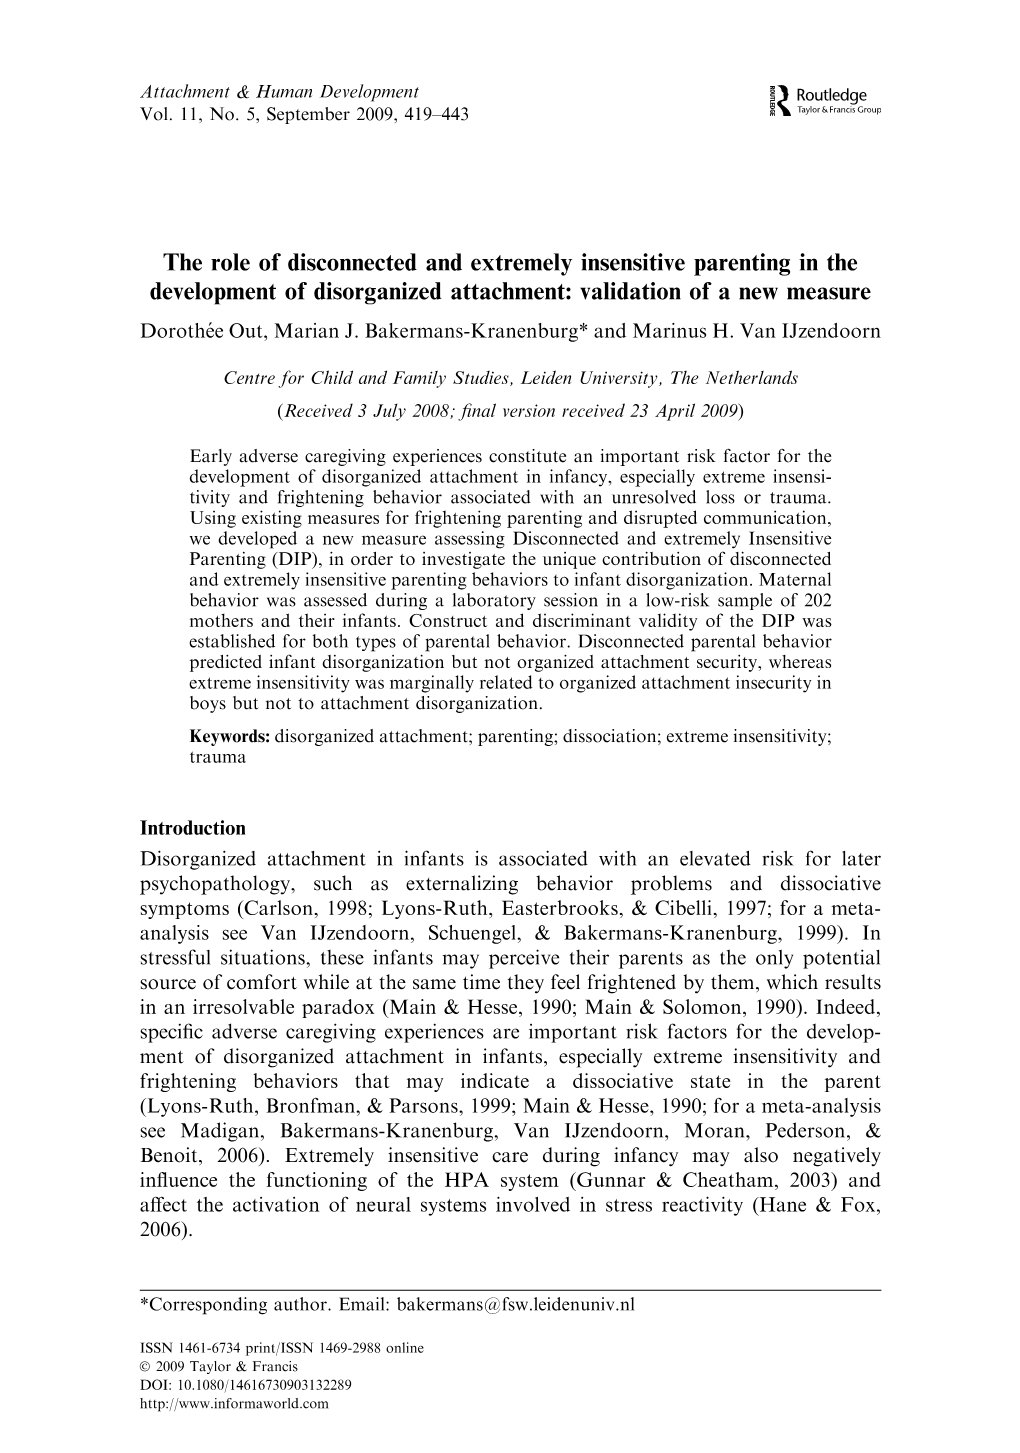 The Role of Disconnected and Extremely Insensitive Parenting in the Development of Disorganized Attachment: Validation of a New Measure Dorothe´ E Out, Marian J